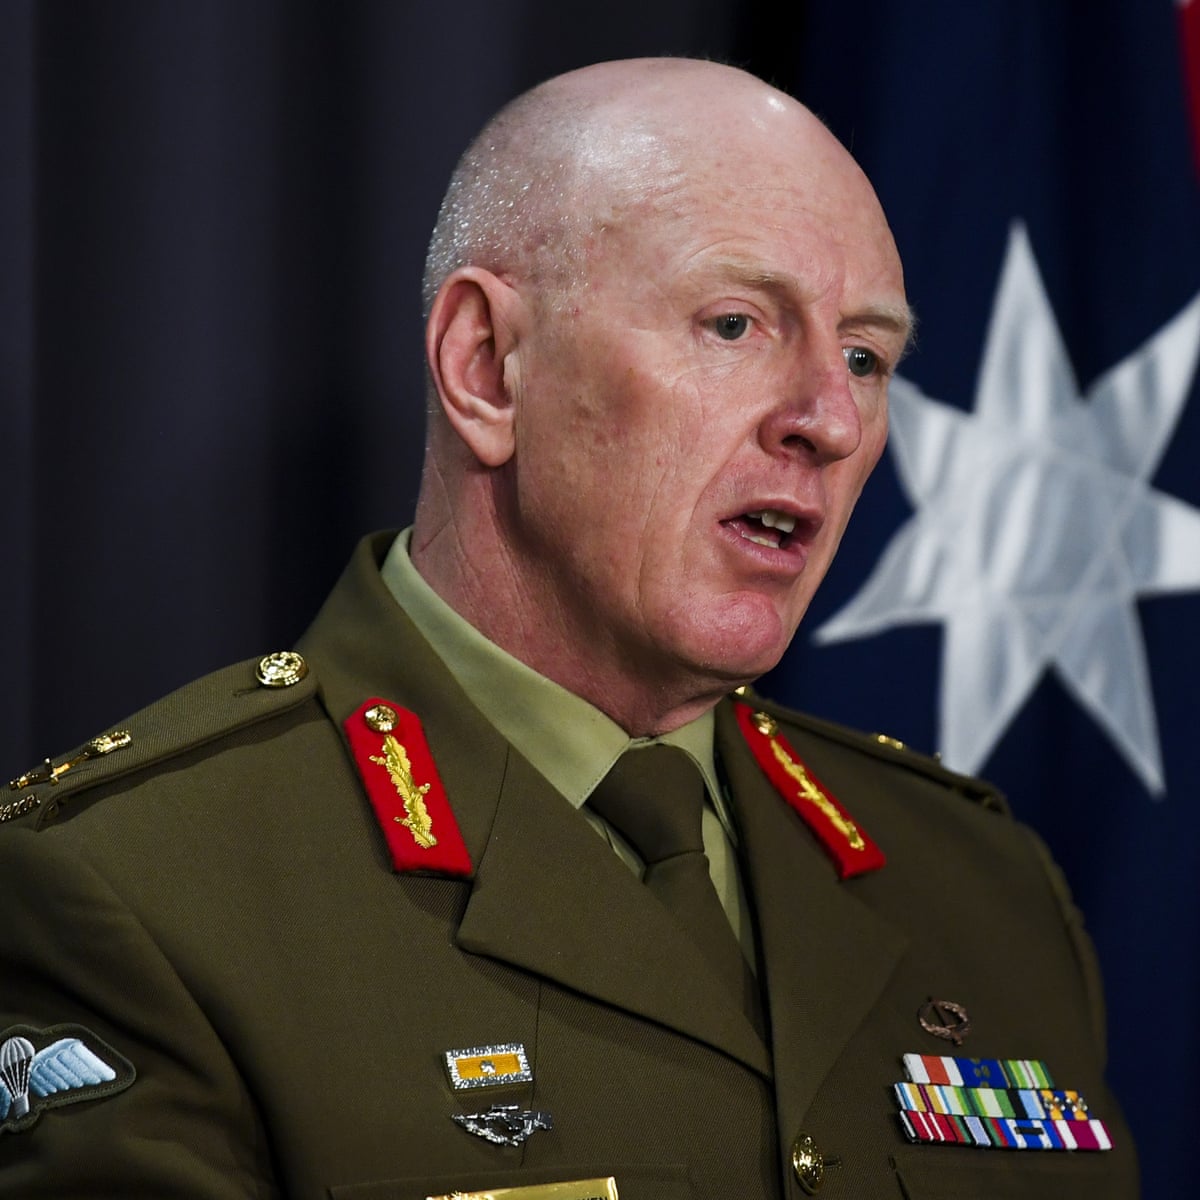 General confusion: who is John Frewen, and is his role in Australia's vaccine rollout? | Australian military | The Guardian